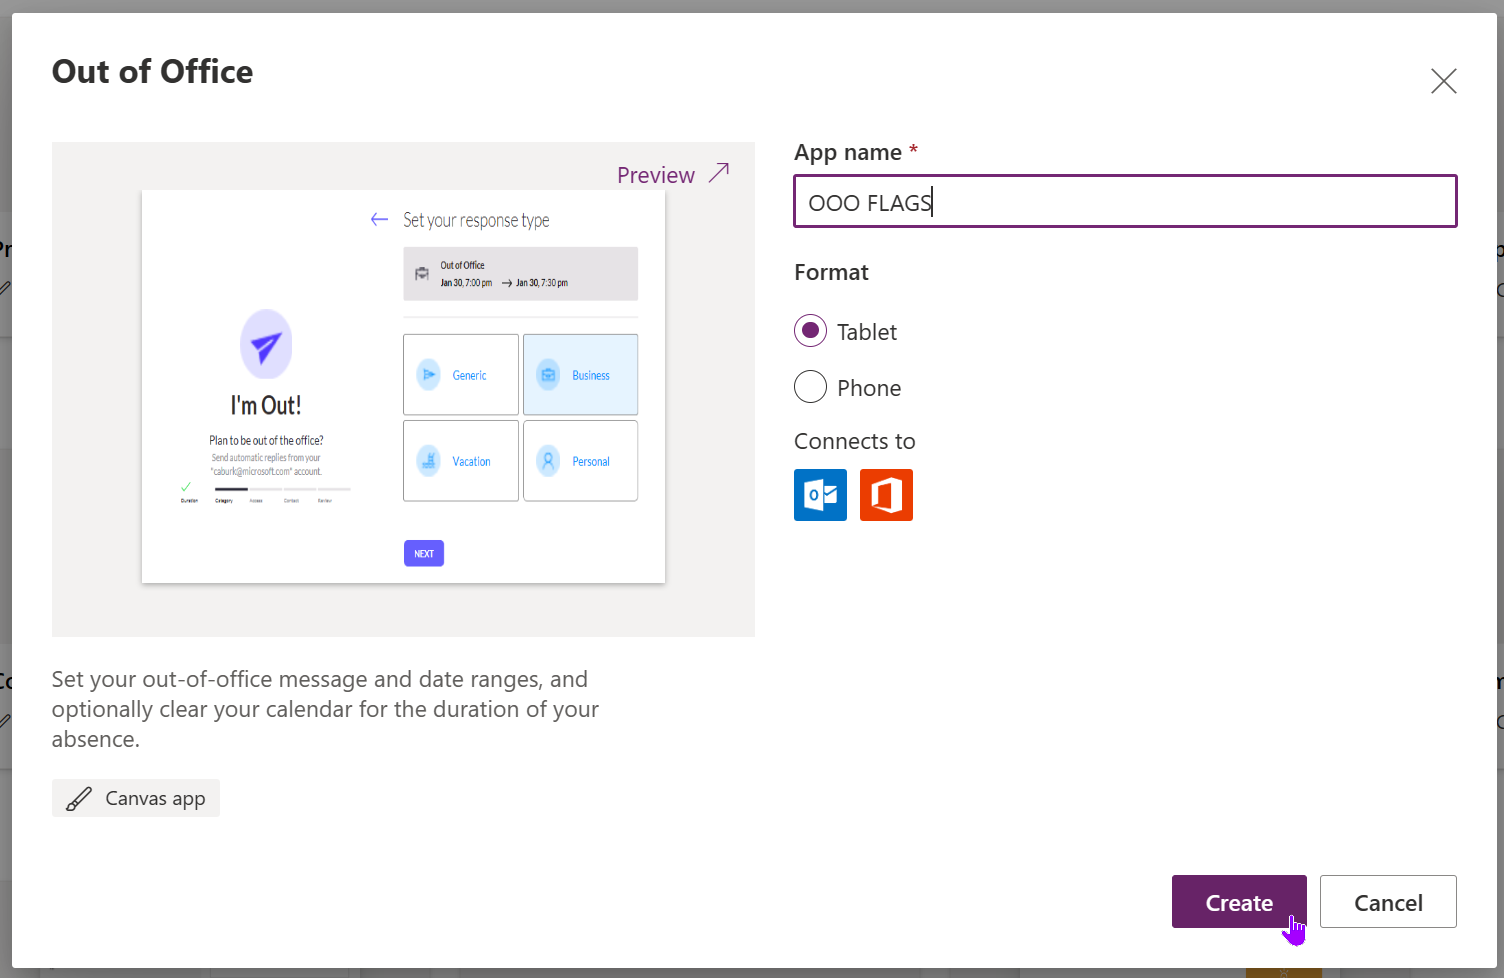 image shows the screen that confirms the app name when building an app from a template in Microsoft Power Apps